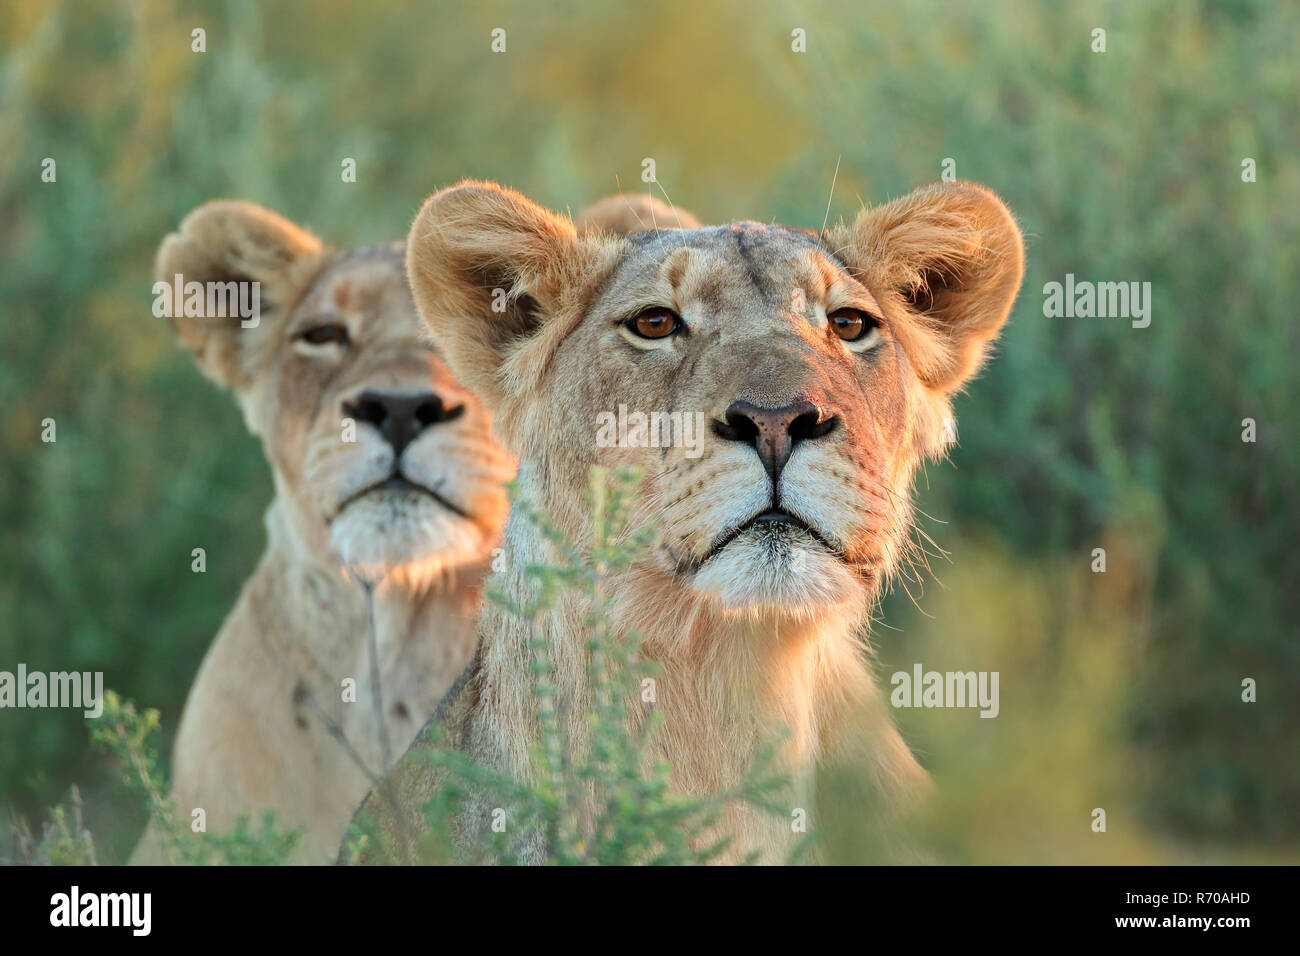 Alert lioness looking intently Stock Photo